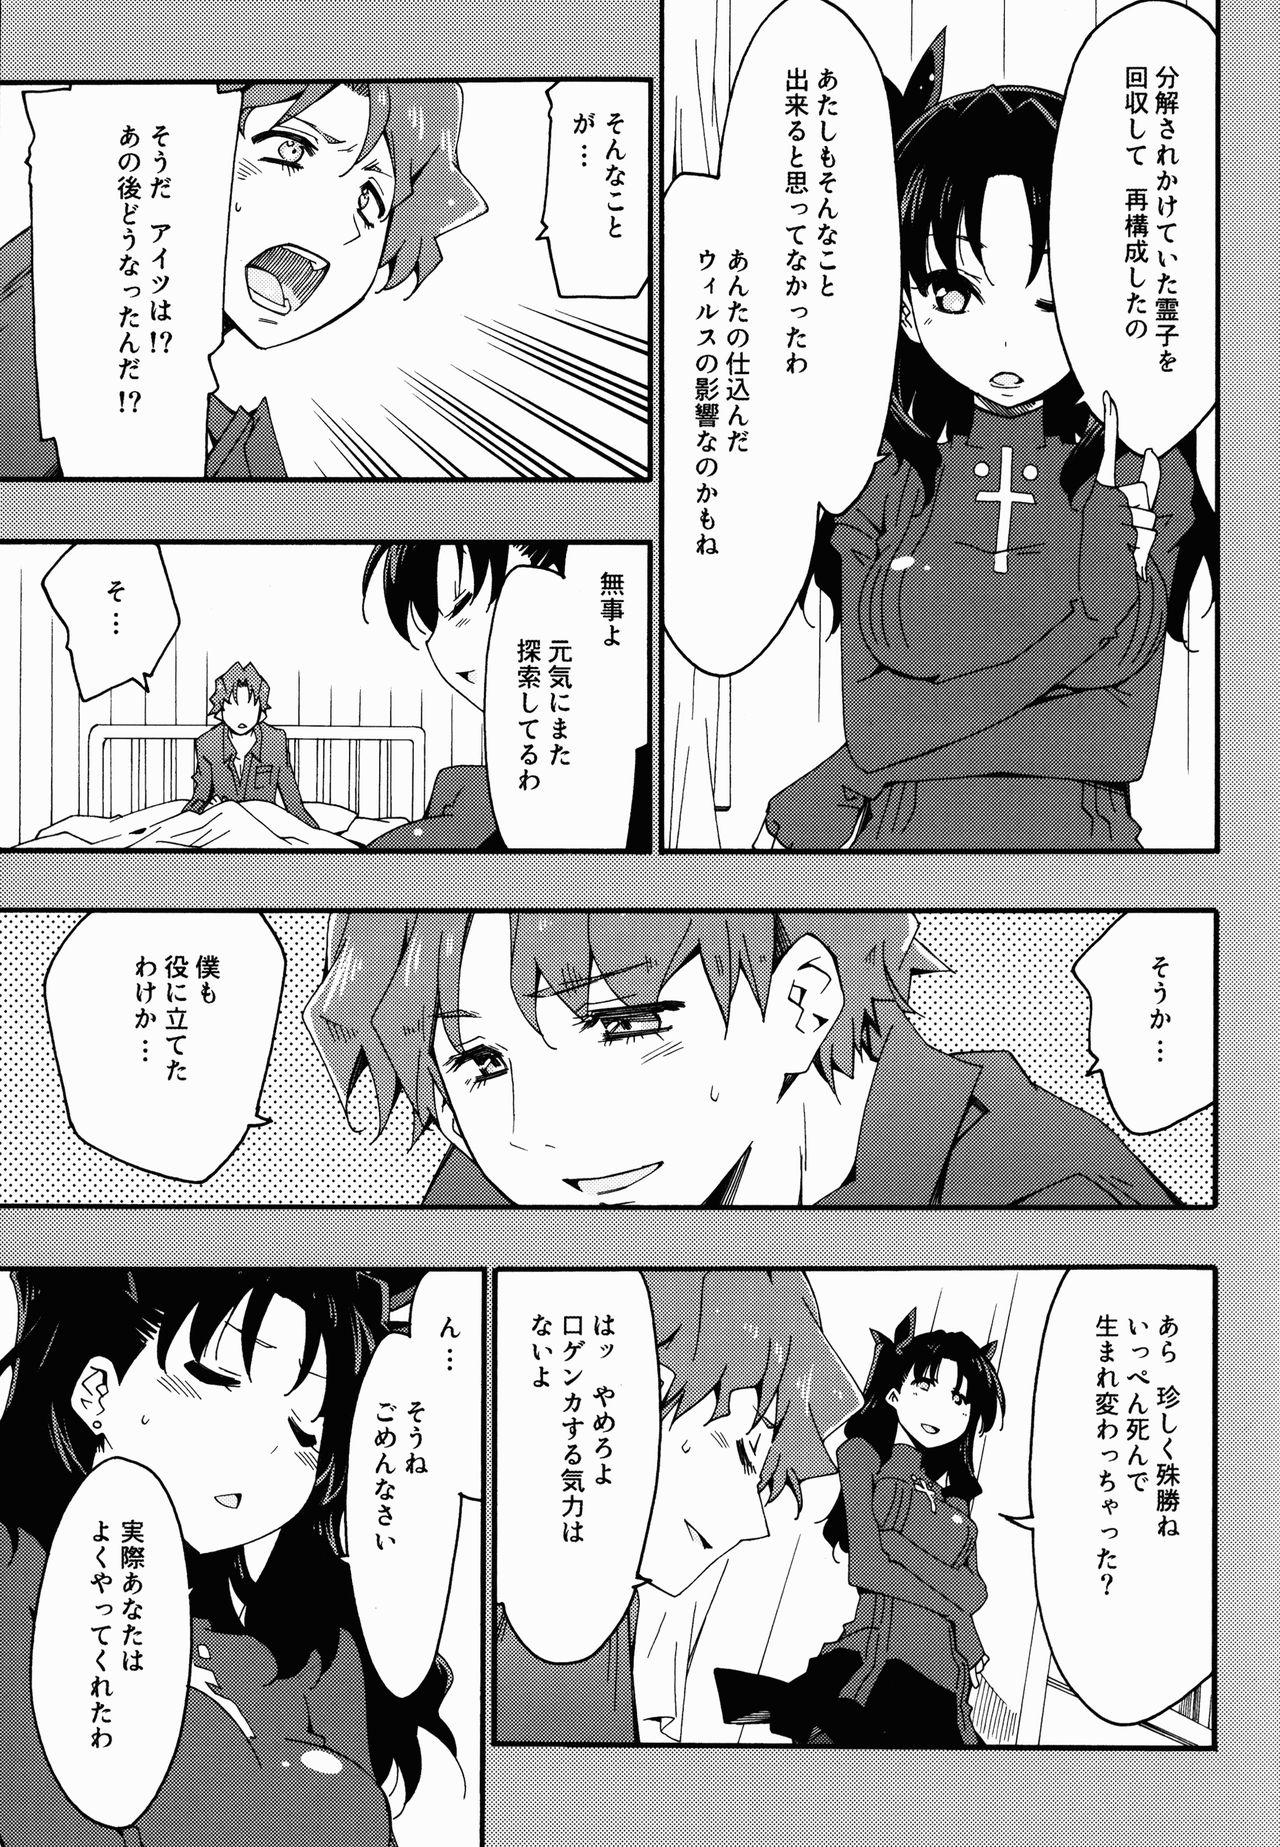 Thot Melty/kiss - Fate extra Internal - Page 7